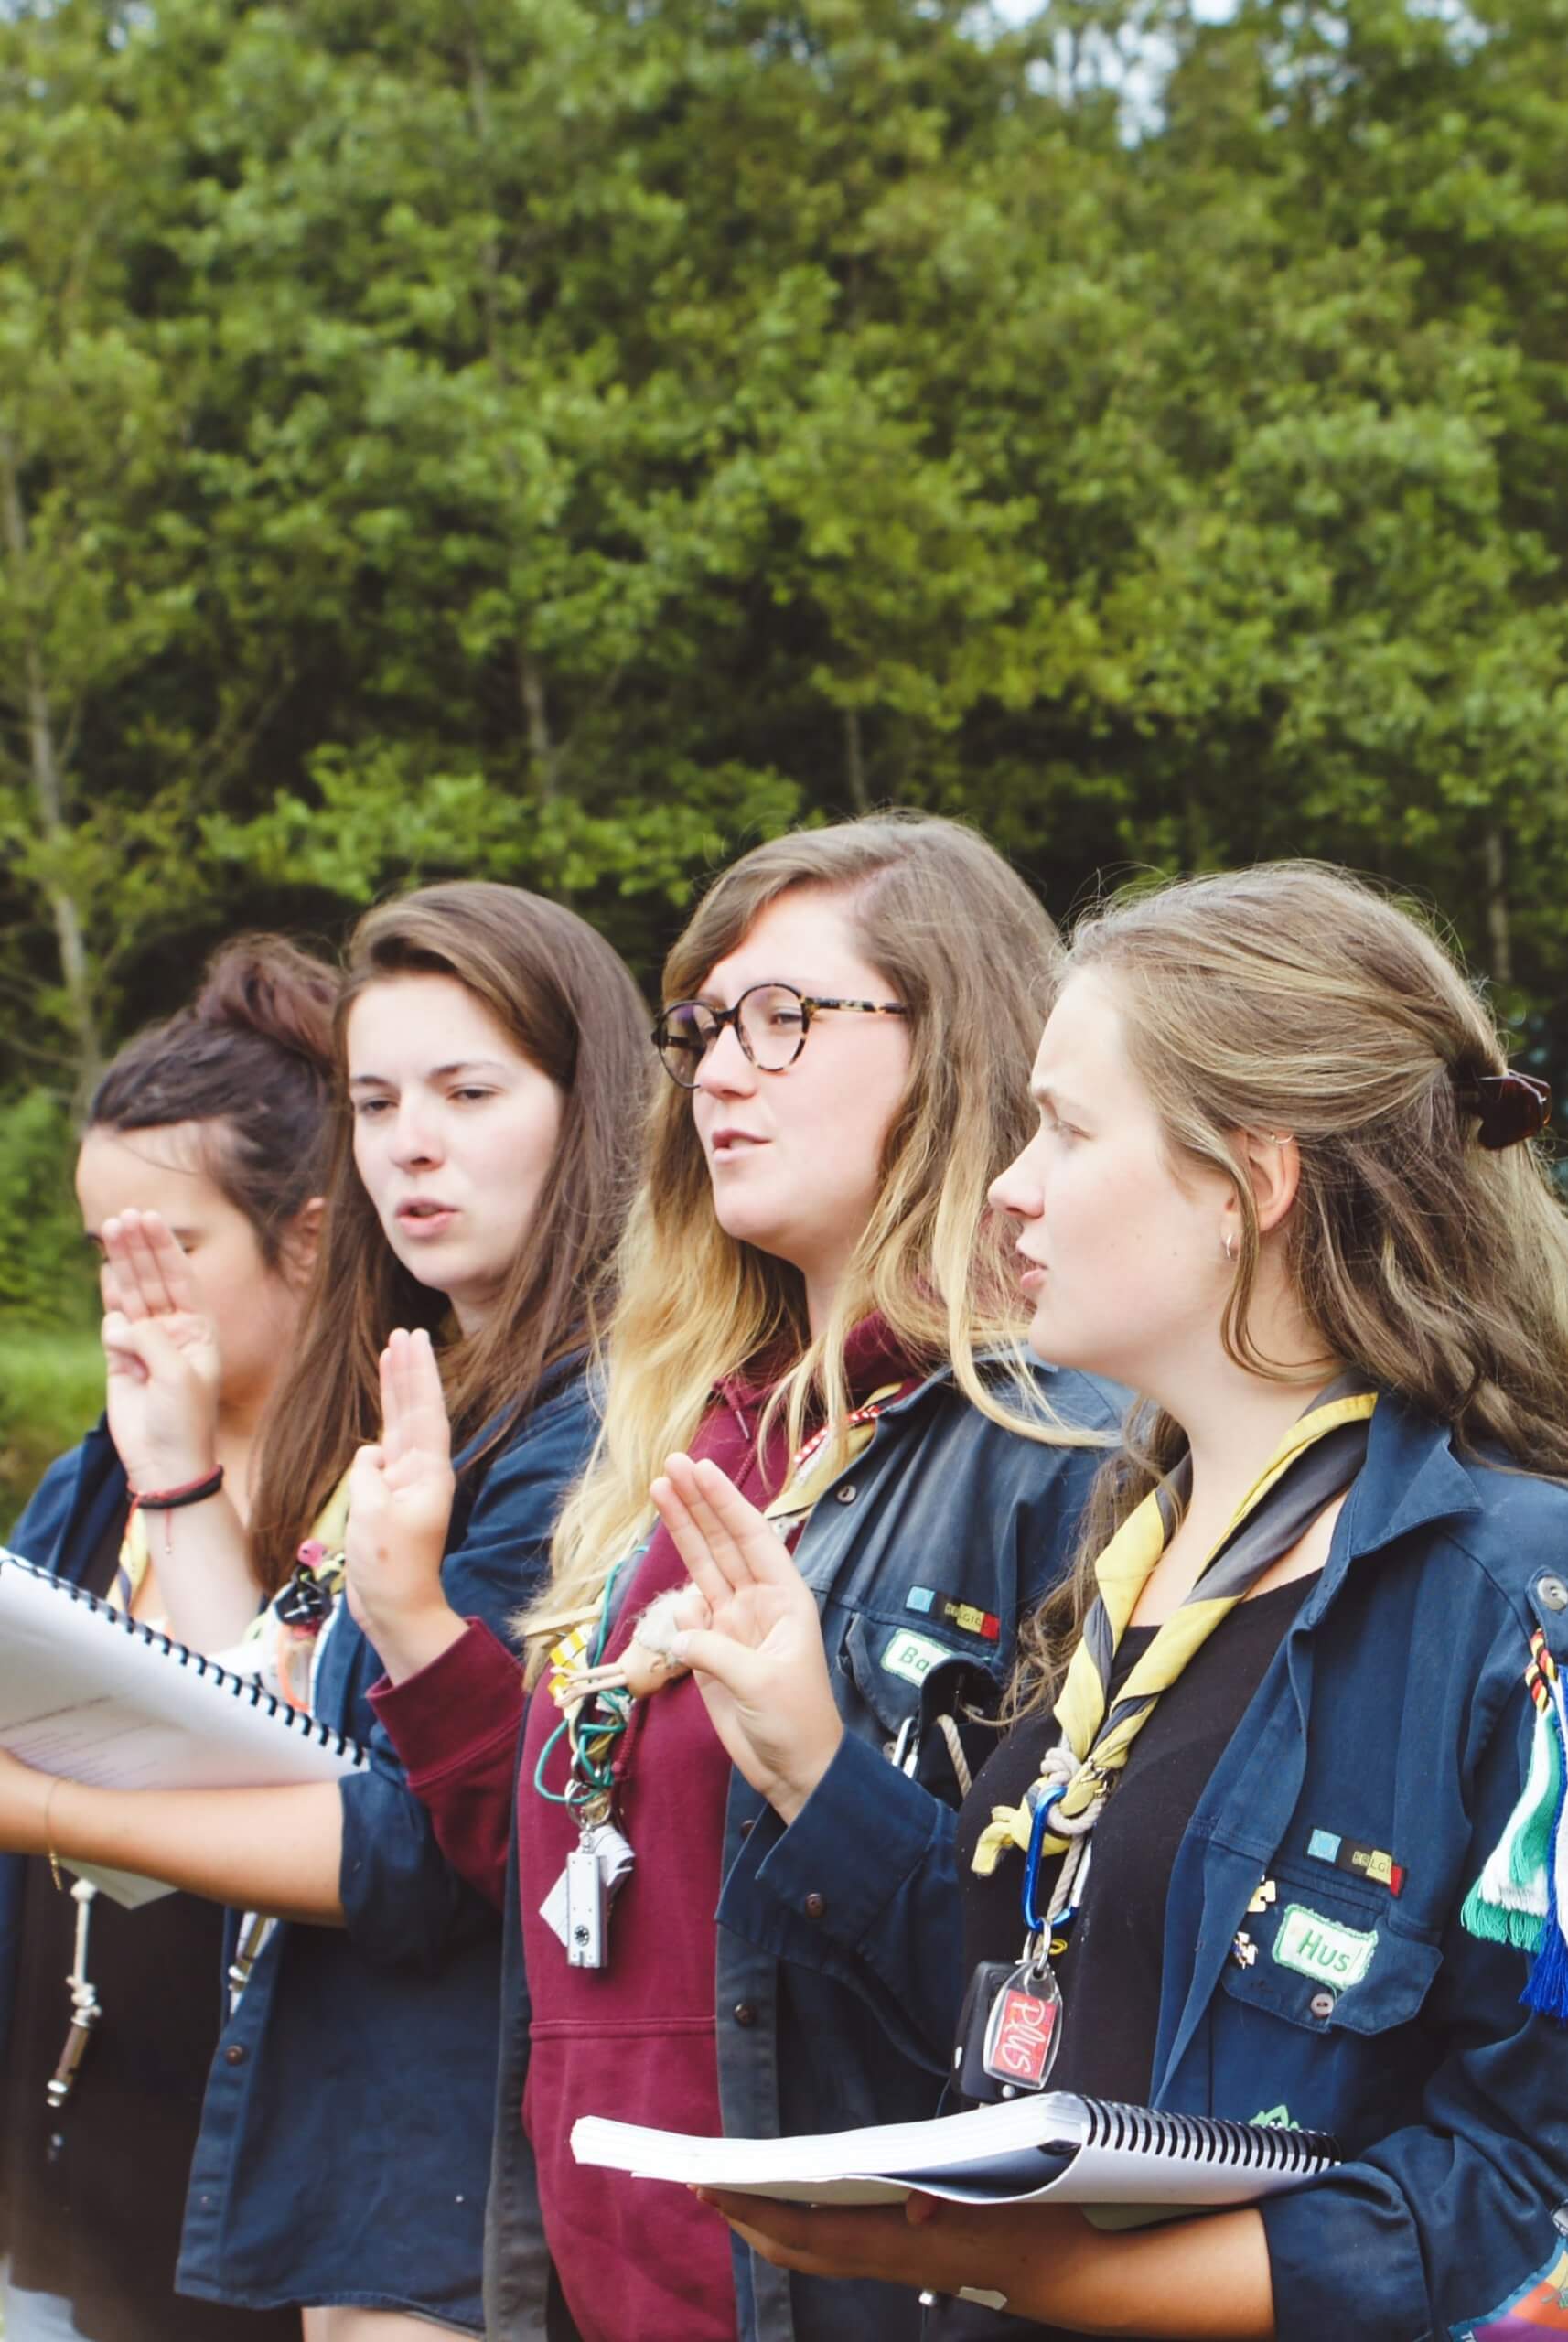 A group of four Girl Scouts saying their pledge with the Girl Scout hand sign